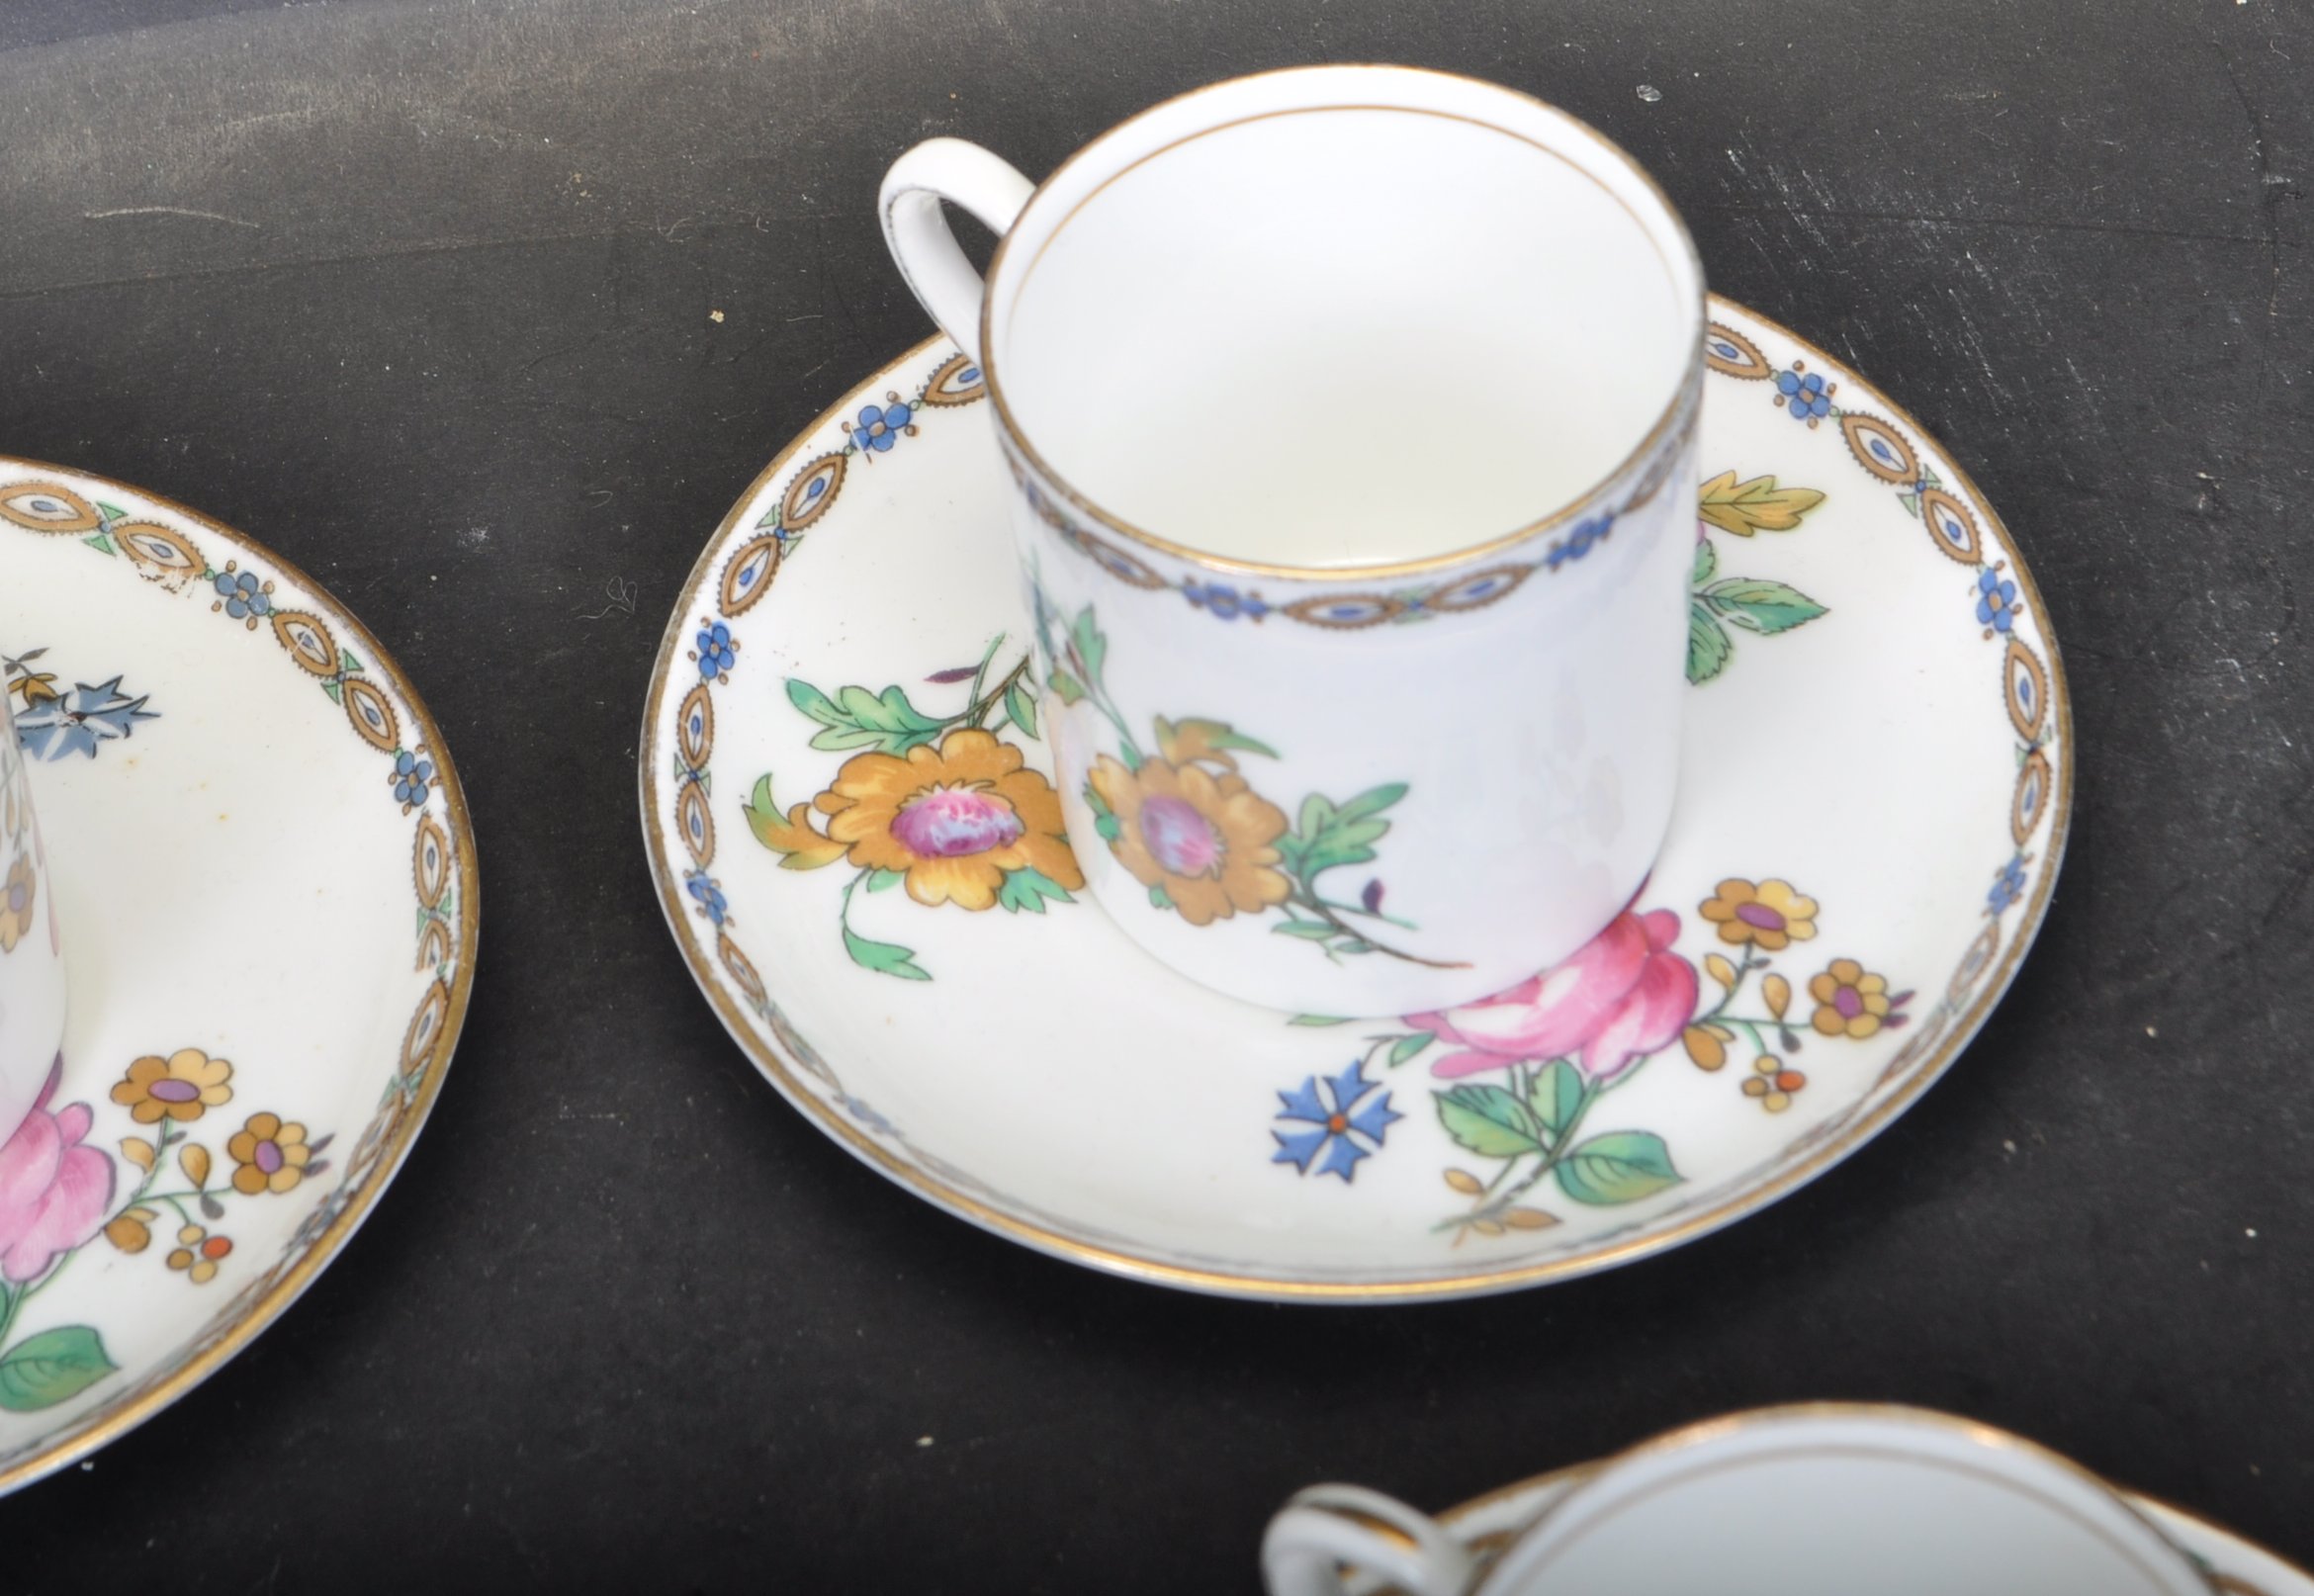 COLLECTION OF EARLY 20TH CENTURY AYNSLEY FINE BONE CHINA - Image 4 of 7